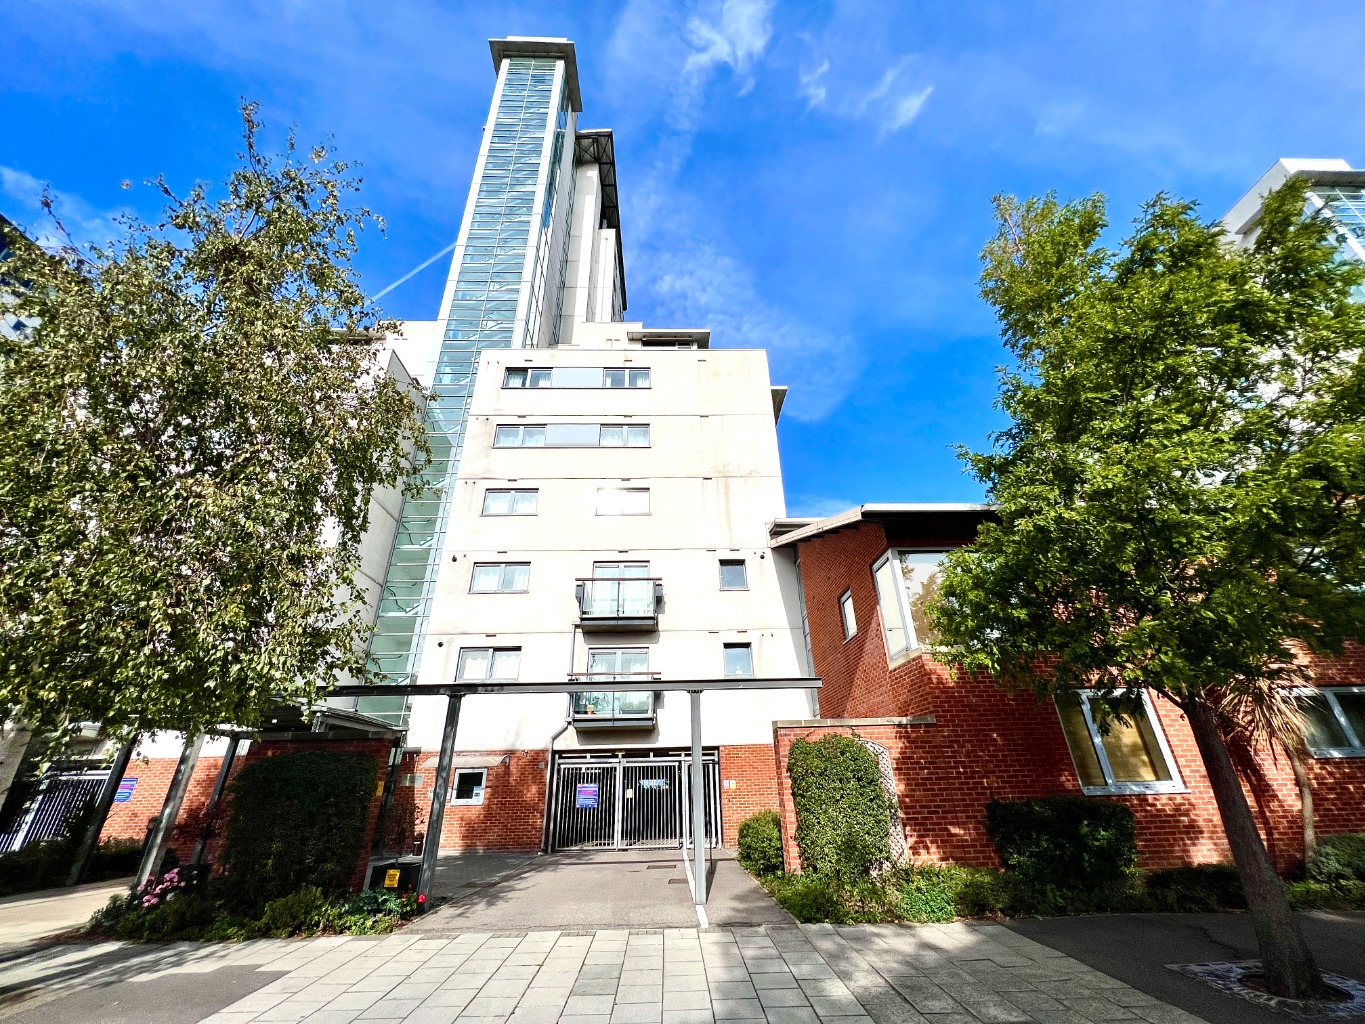 Beaumont Gibbs are delighted to offer this superb one bedroomed raised ground floor flat offered to let in Erebus Drive, West Thamesmead. The property comes fully furnished and benefits from having direct river views, allocated car parking, fitted kitchen, modern bathroom suite and concierge.